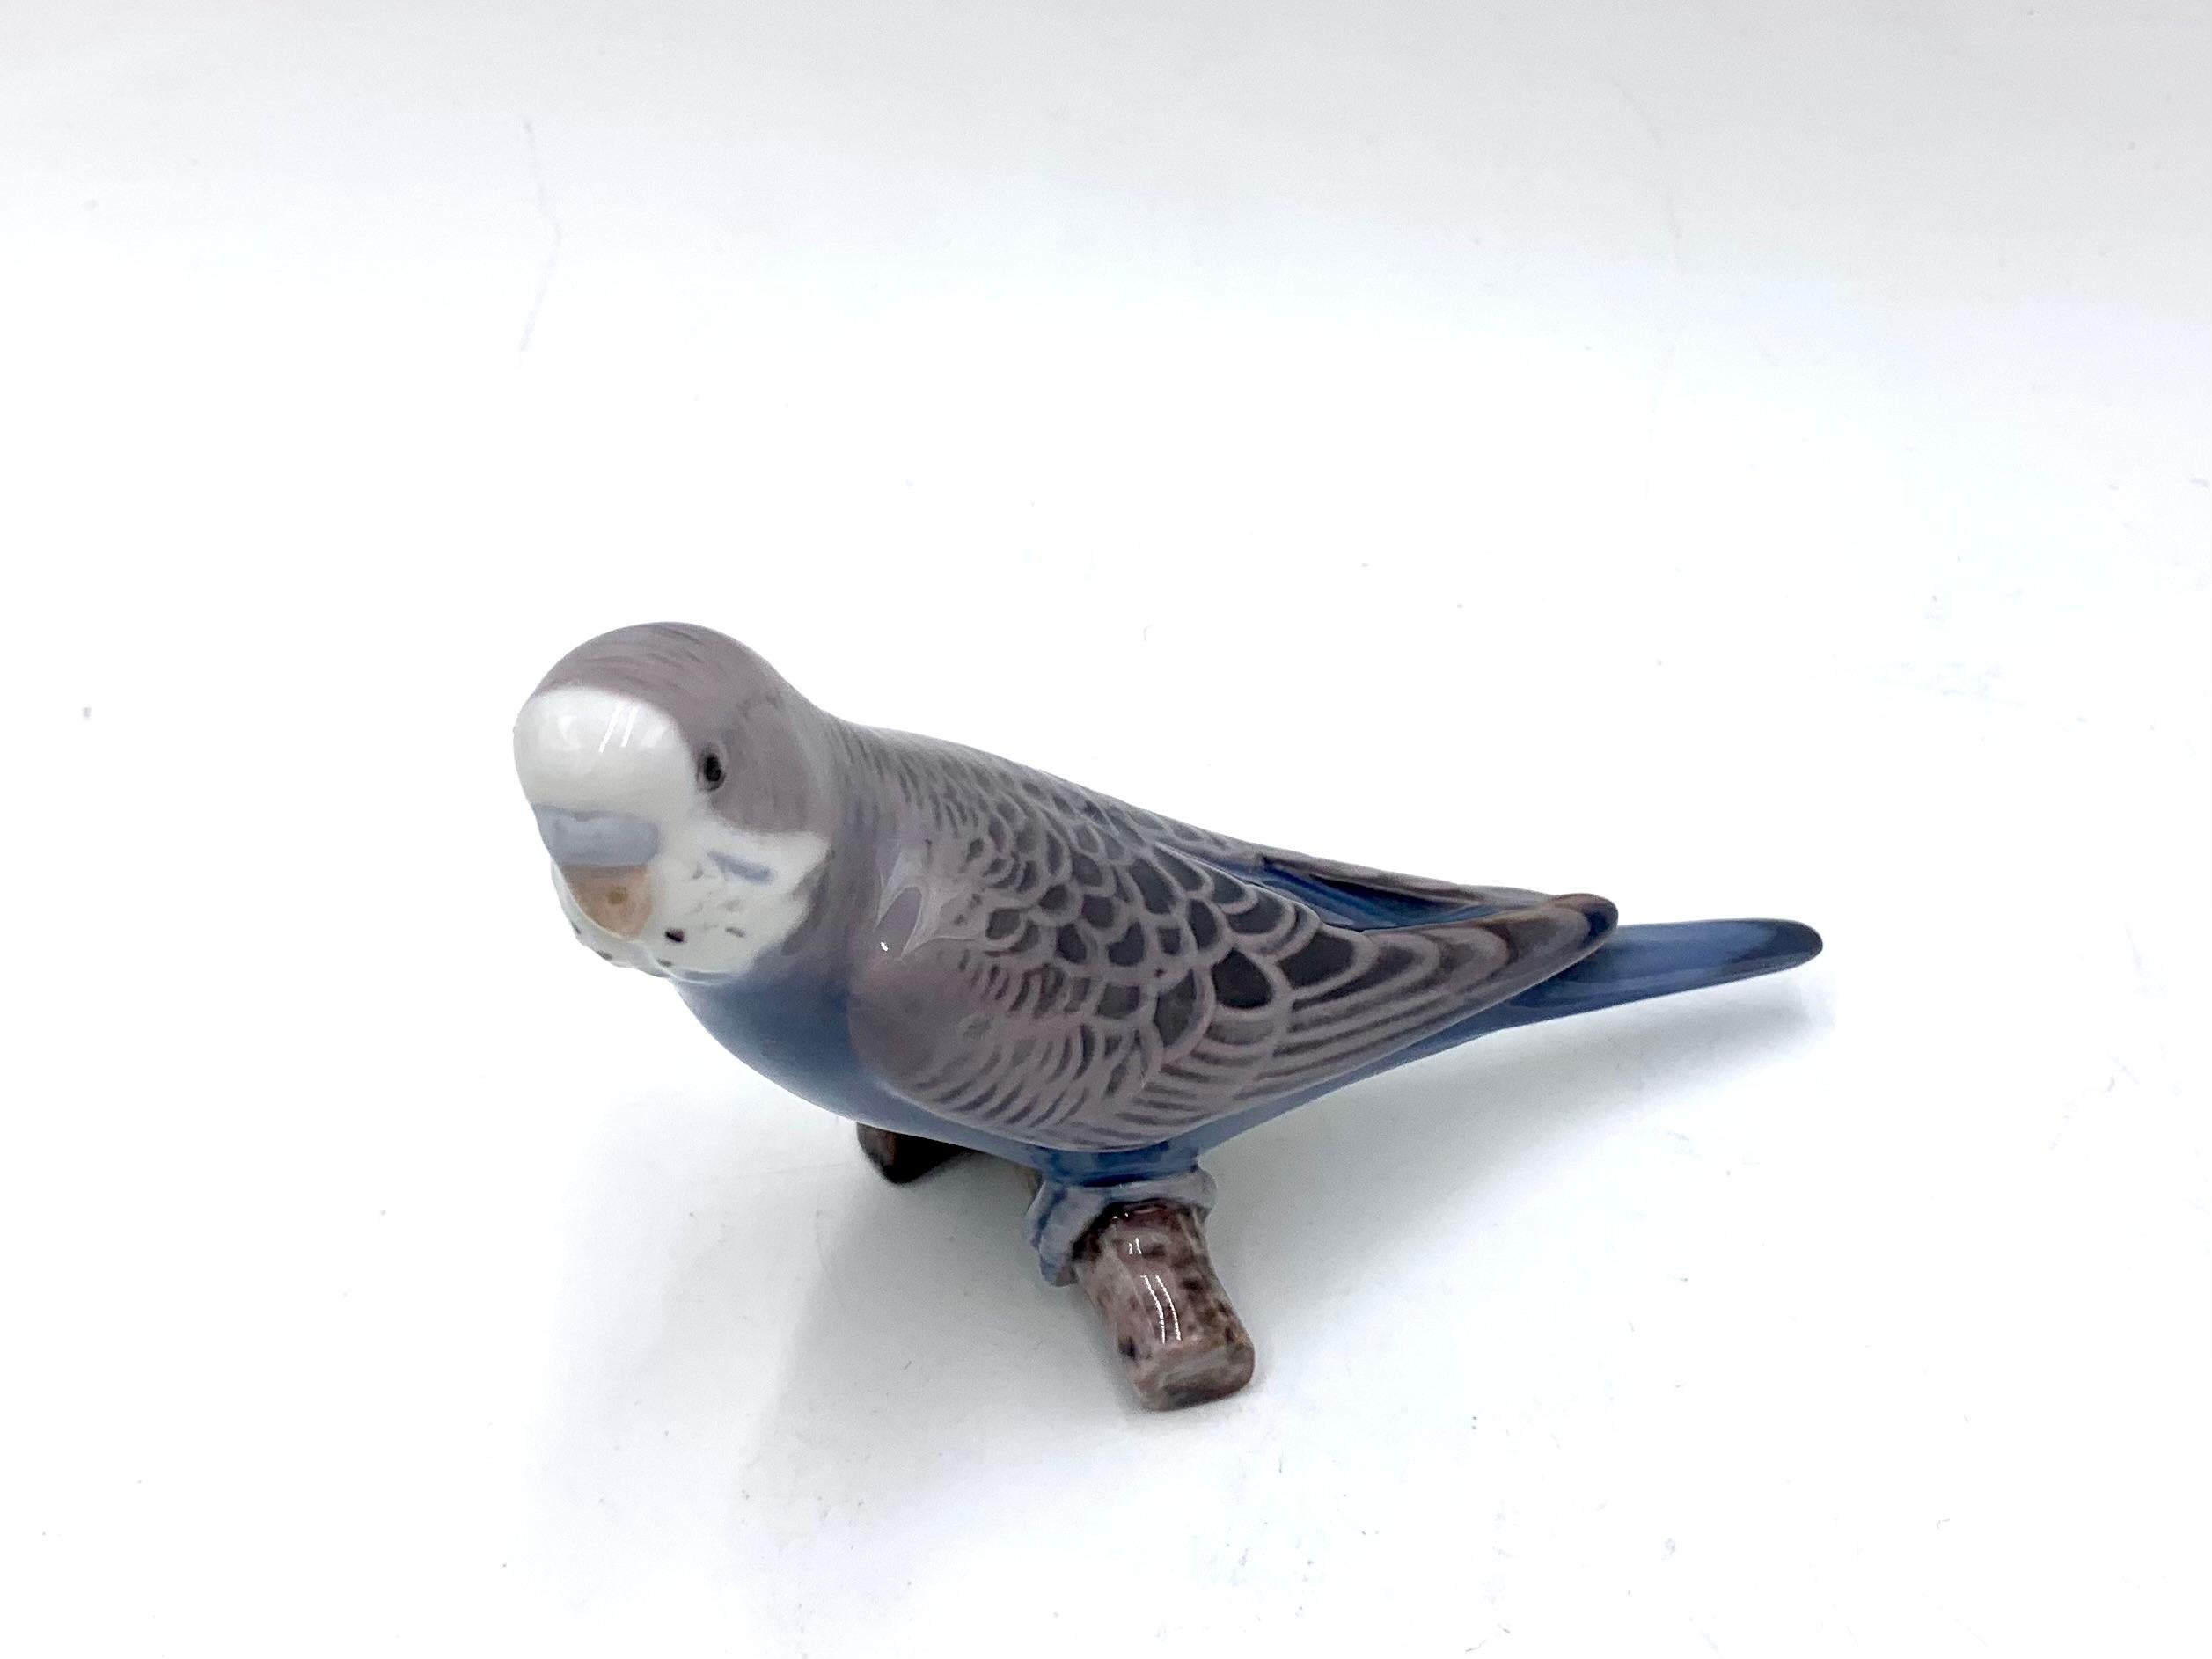 Porcelain figurine of a blue wavy parrot

Made in Denmark by Bing & Grondahl

Produced in the years 1958-1962

Very good condition, no damage.

Measures: height 9.5 cm width 14.5 cm depth 6 cm.